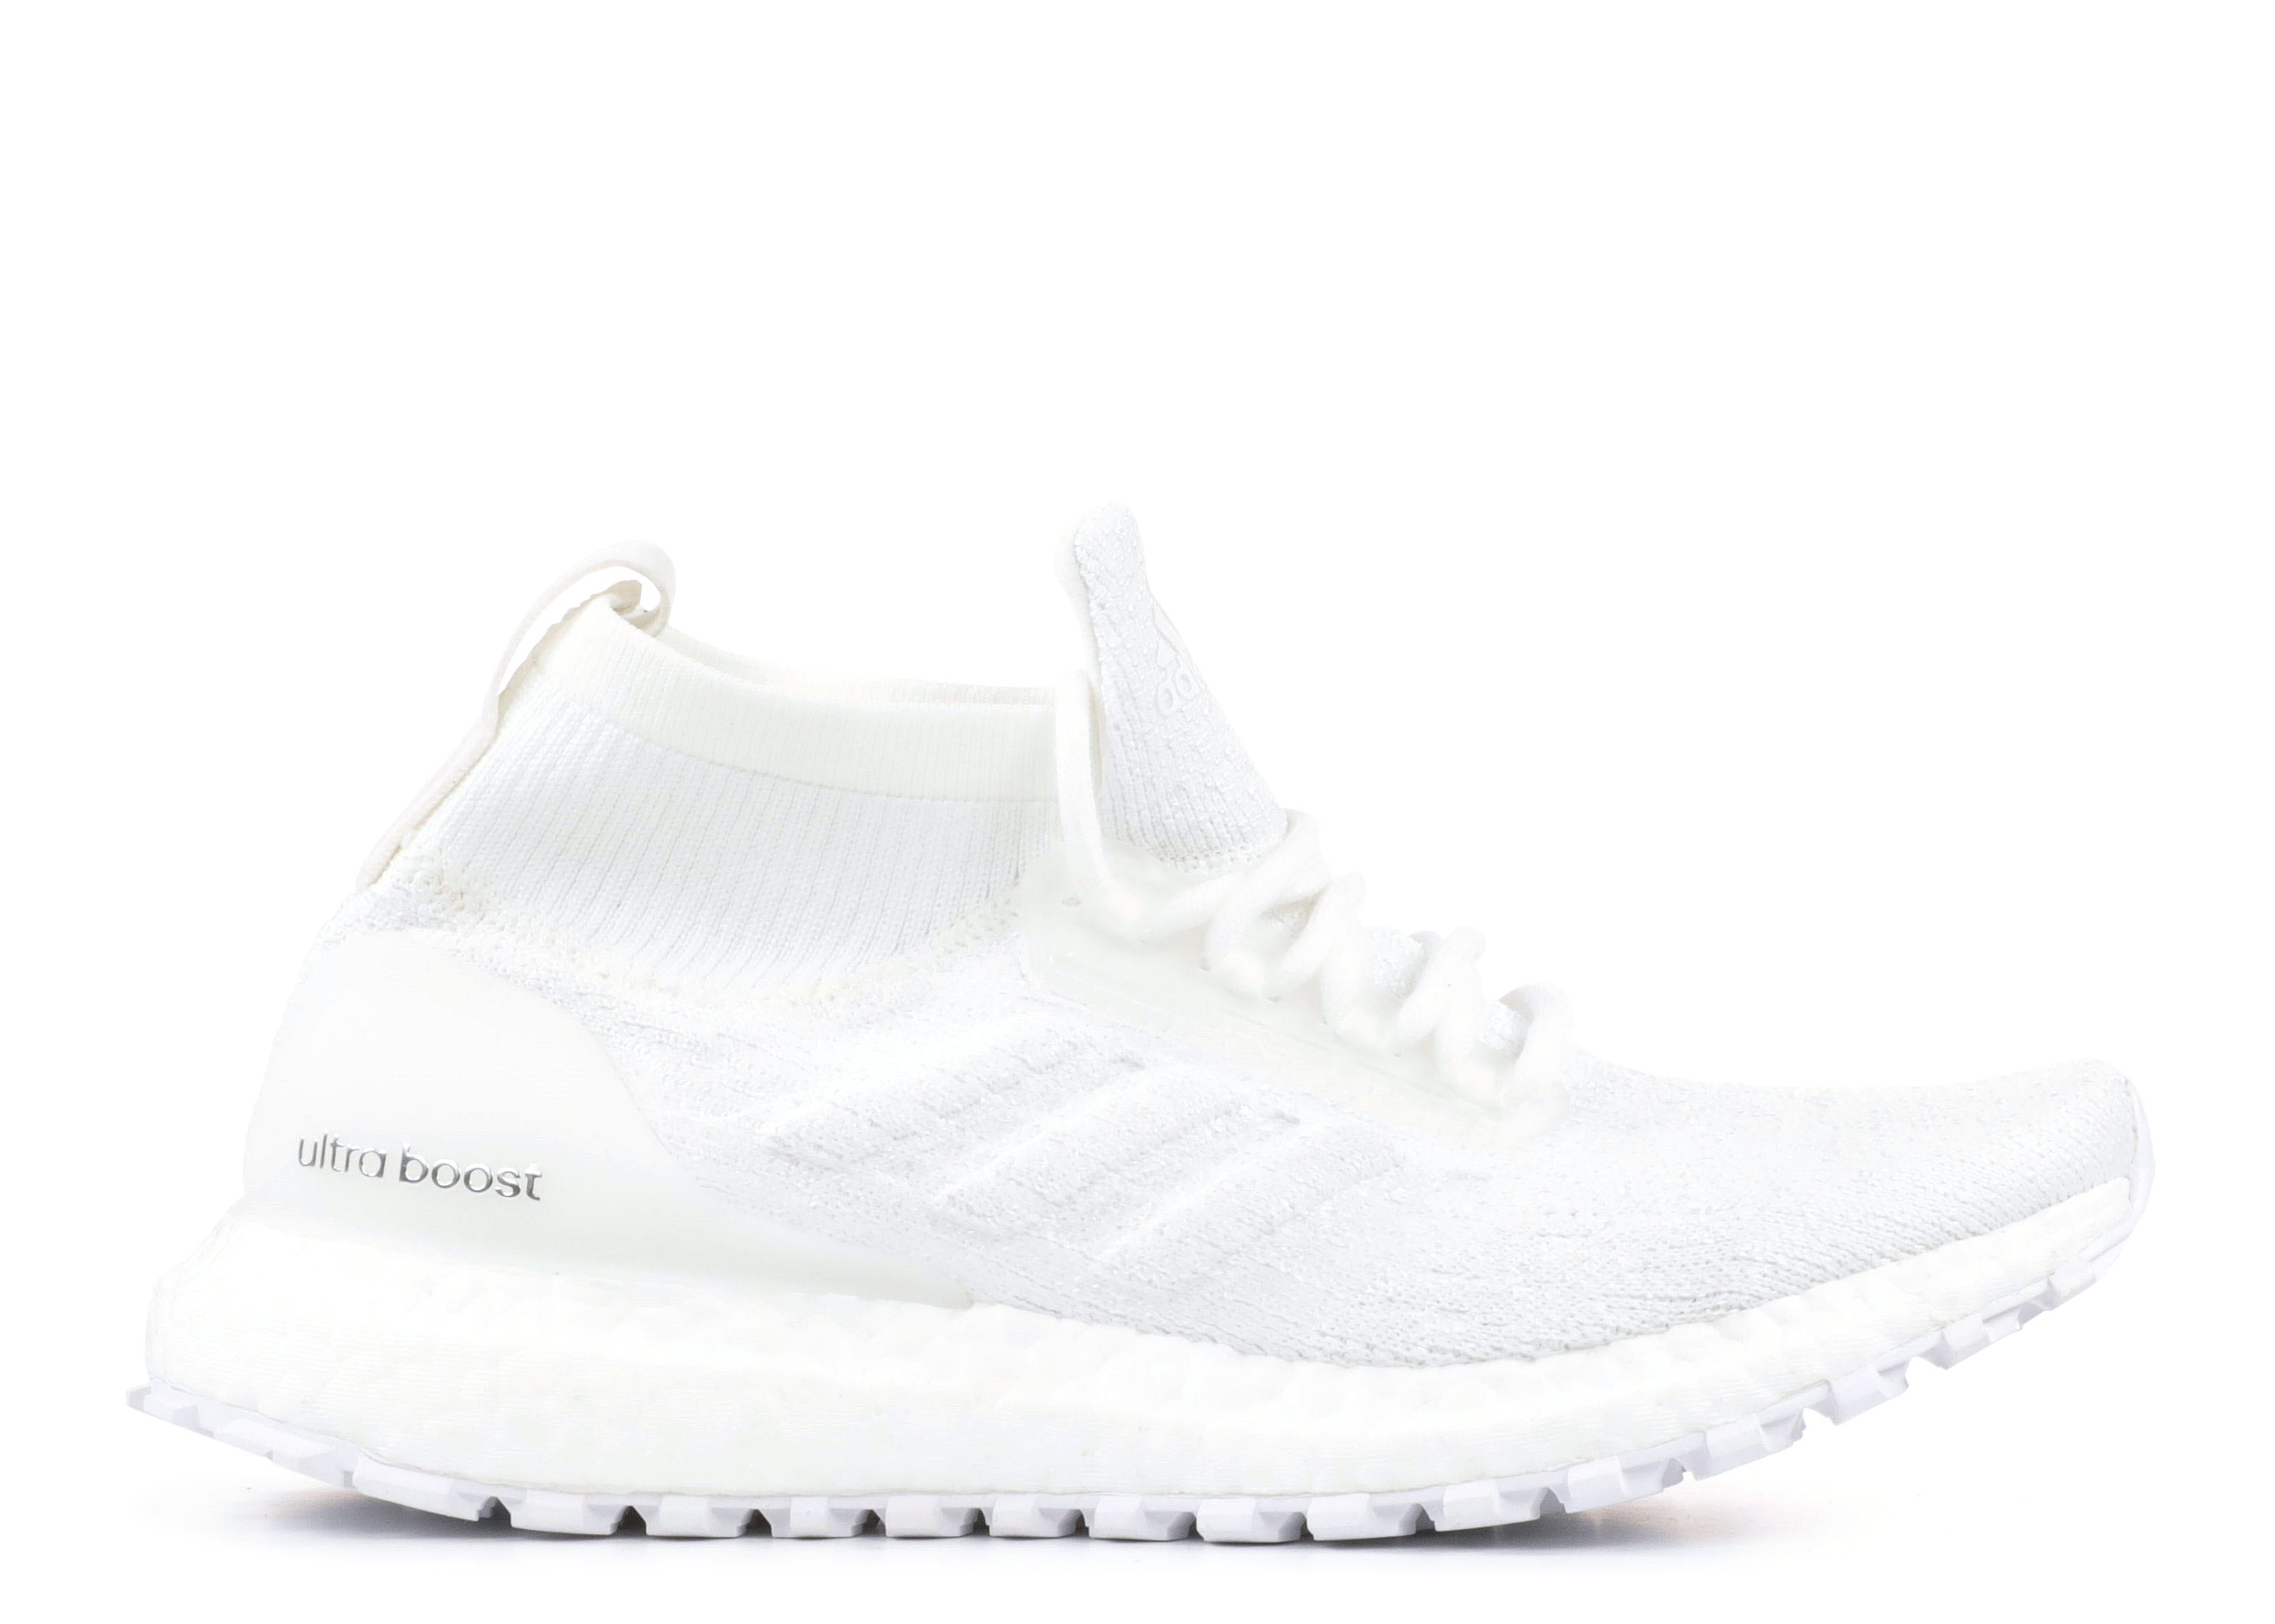 UltraBoost ATR Mid 'Undyed' - Adidas - BB6131 - non dyed/non dyed/non dyed  | Flight Club